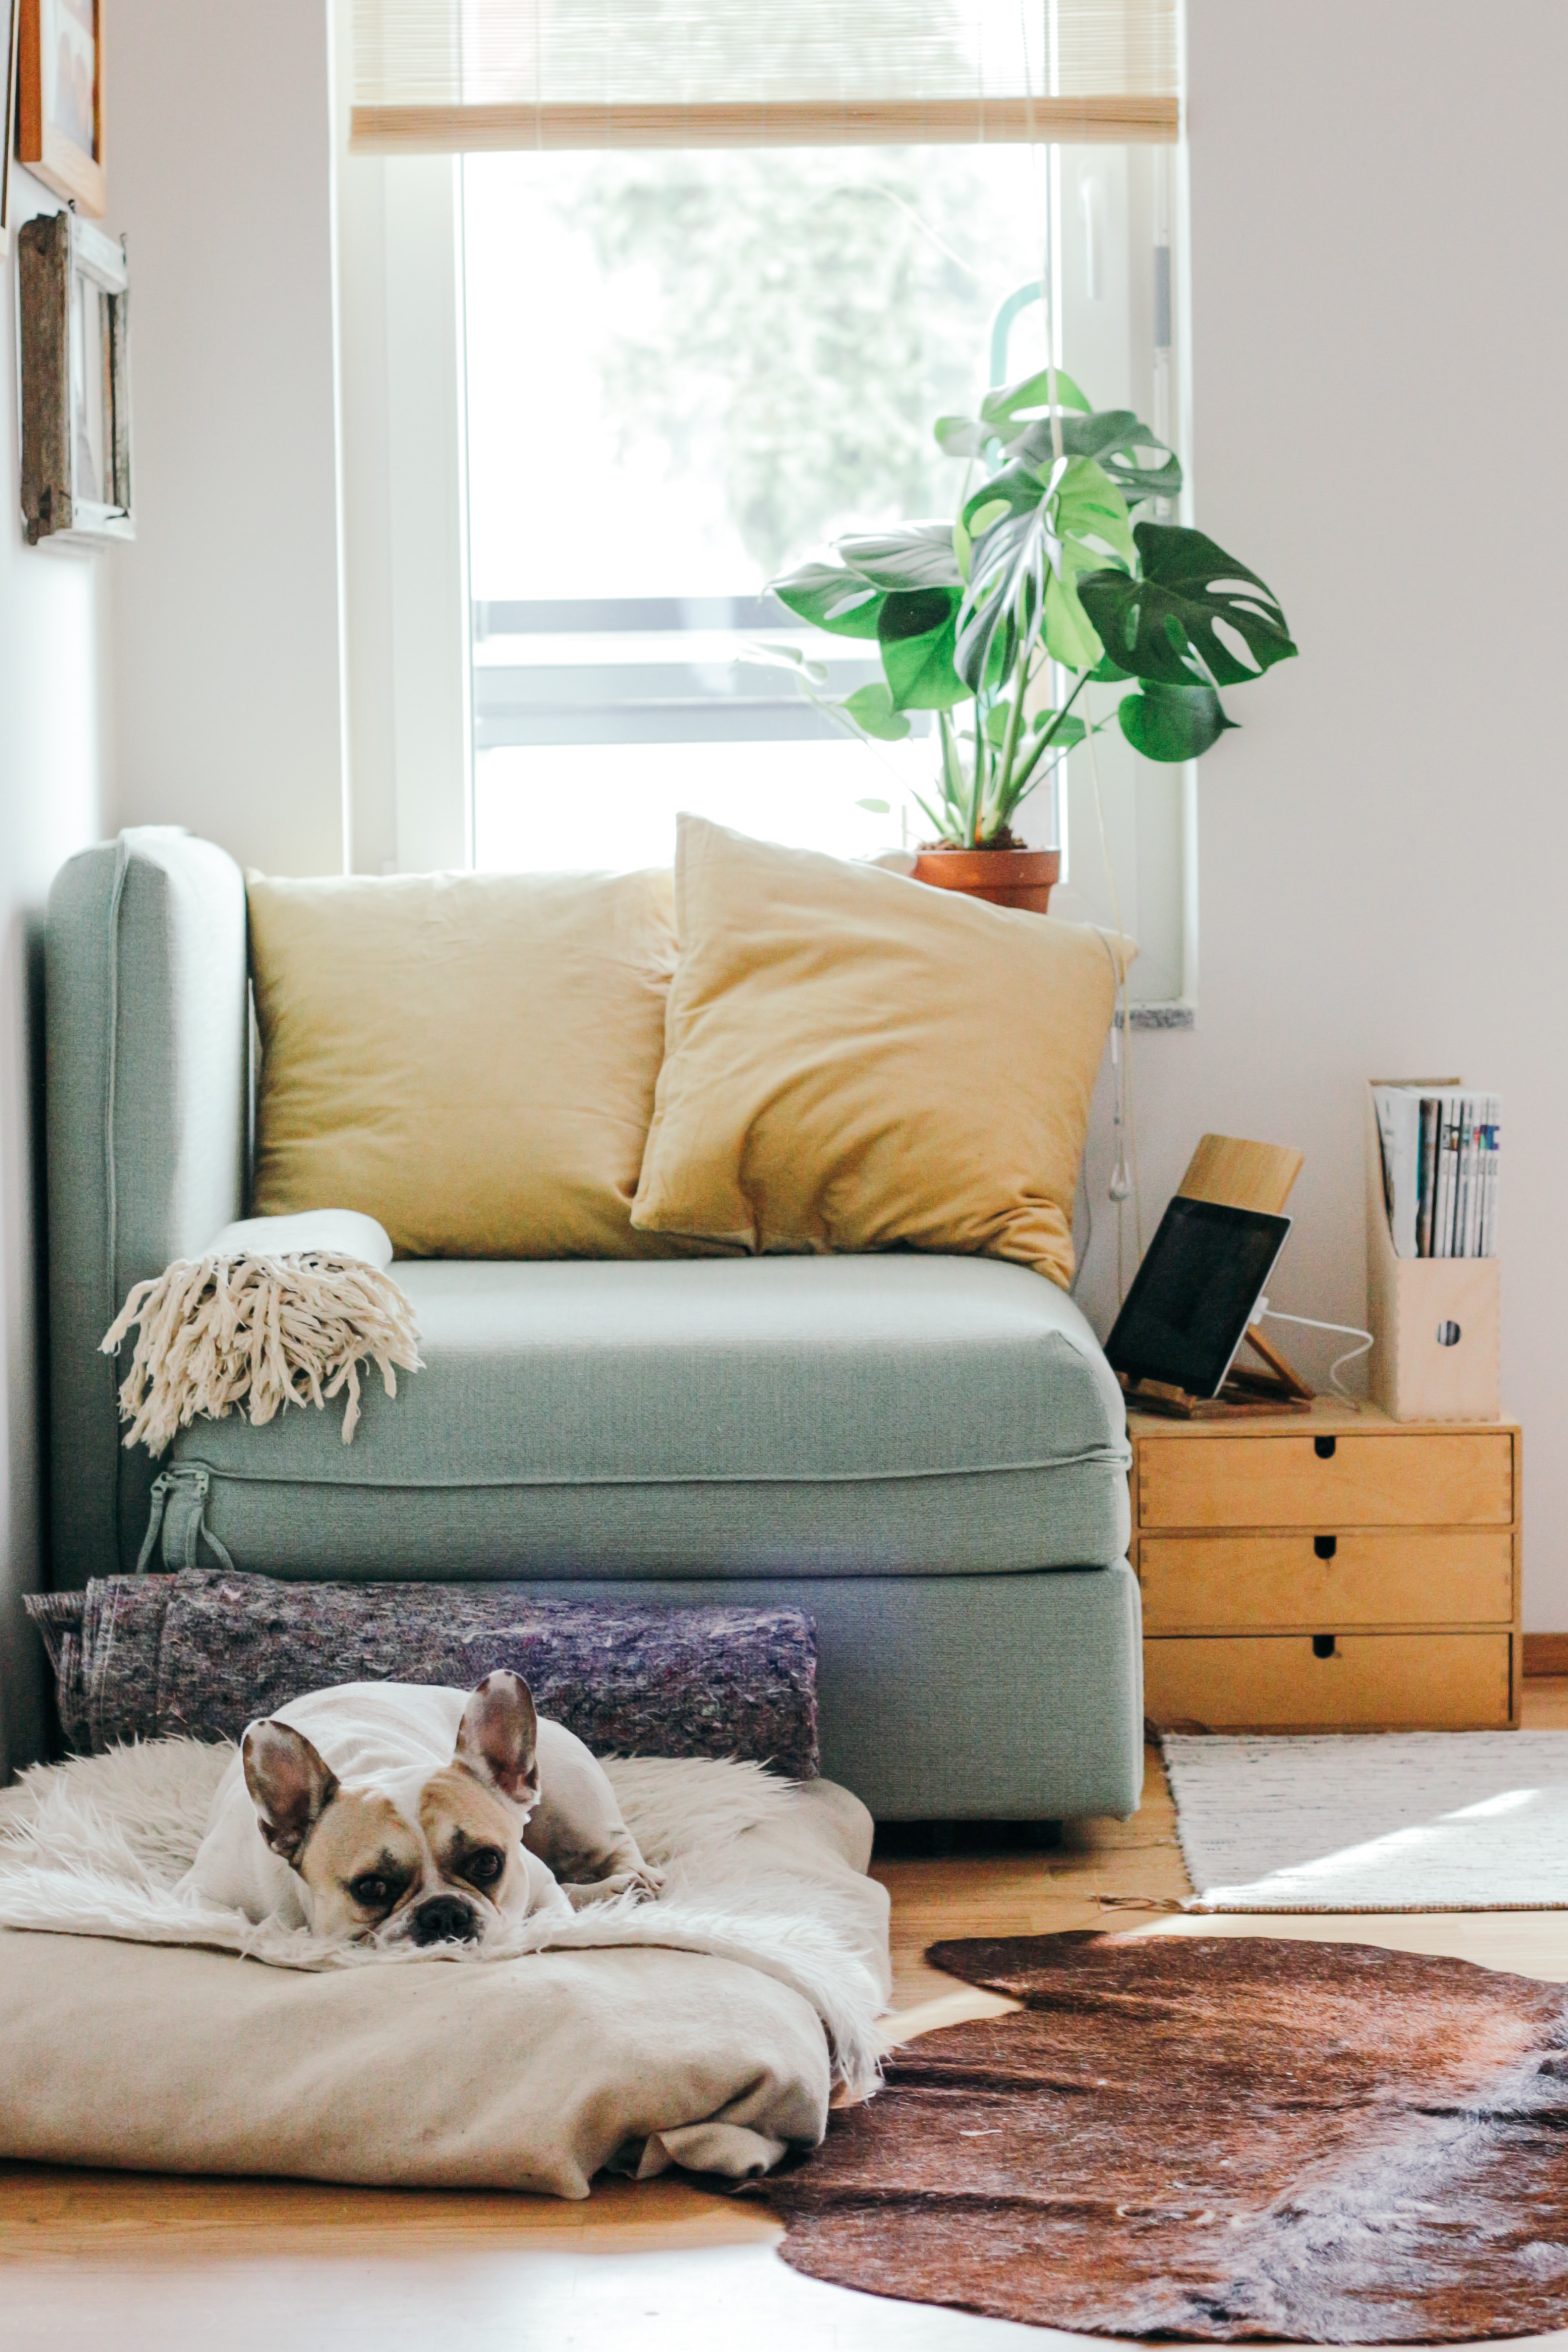 A cozy looking living room with a comfy sofa, plush cushions, and a French Bulldog on a floor pillow.